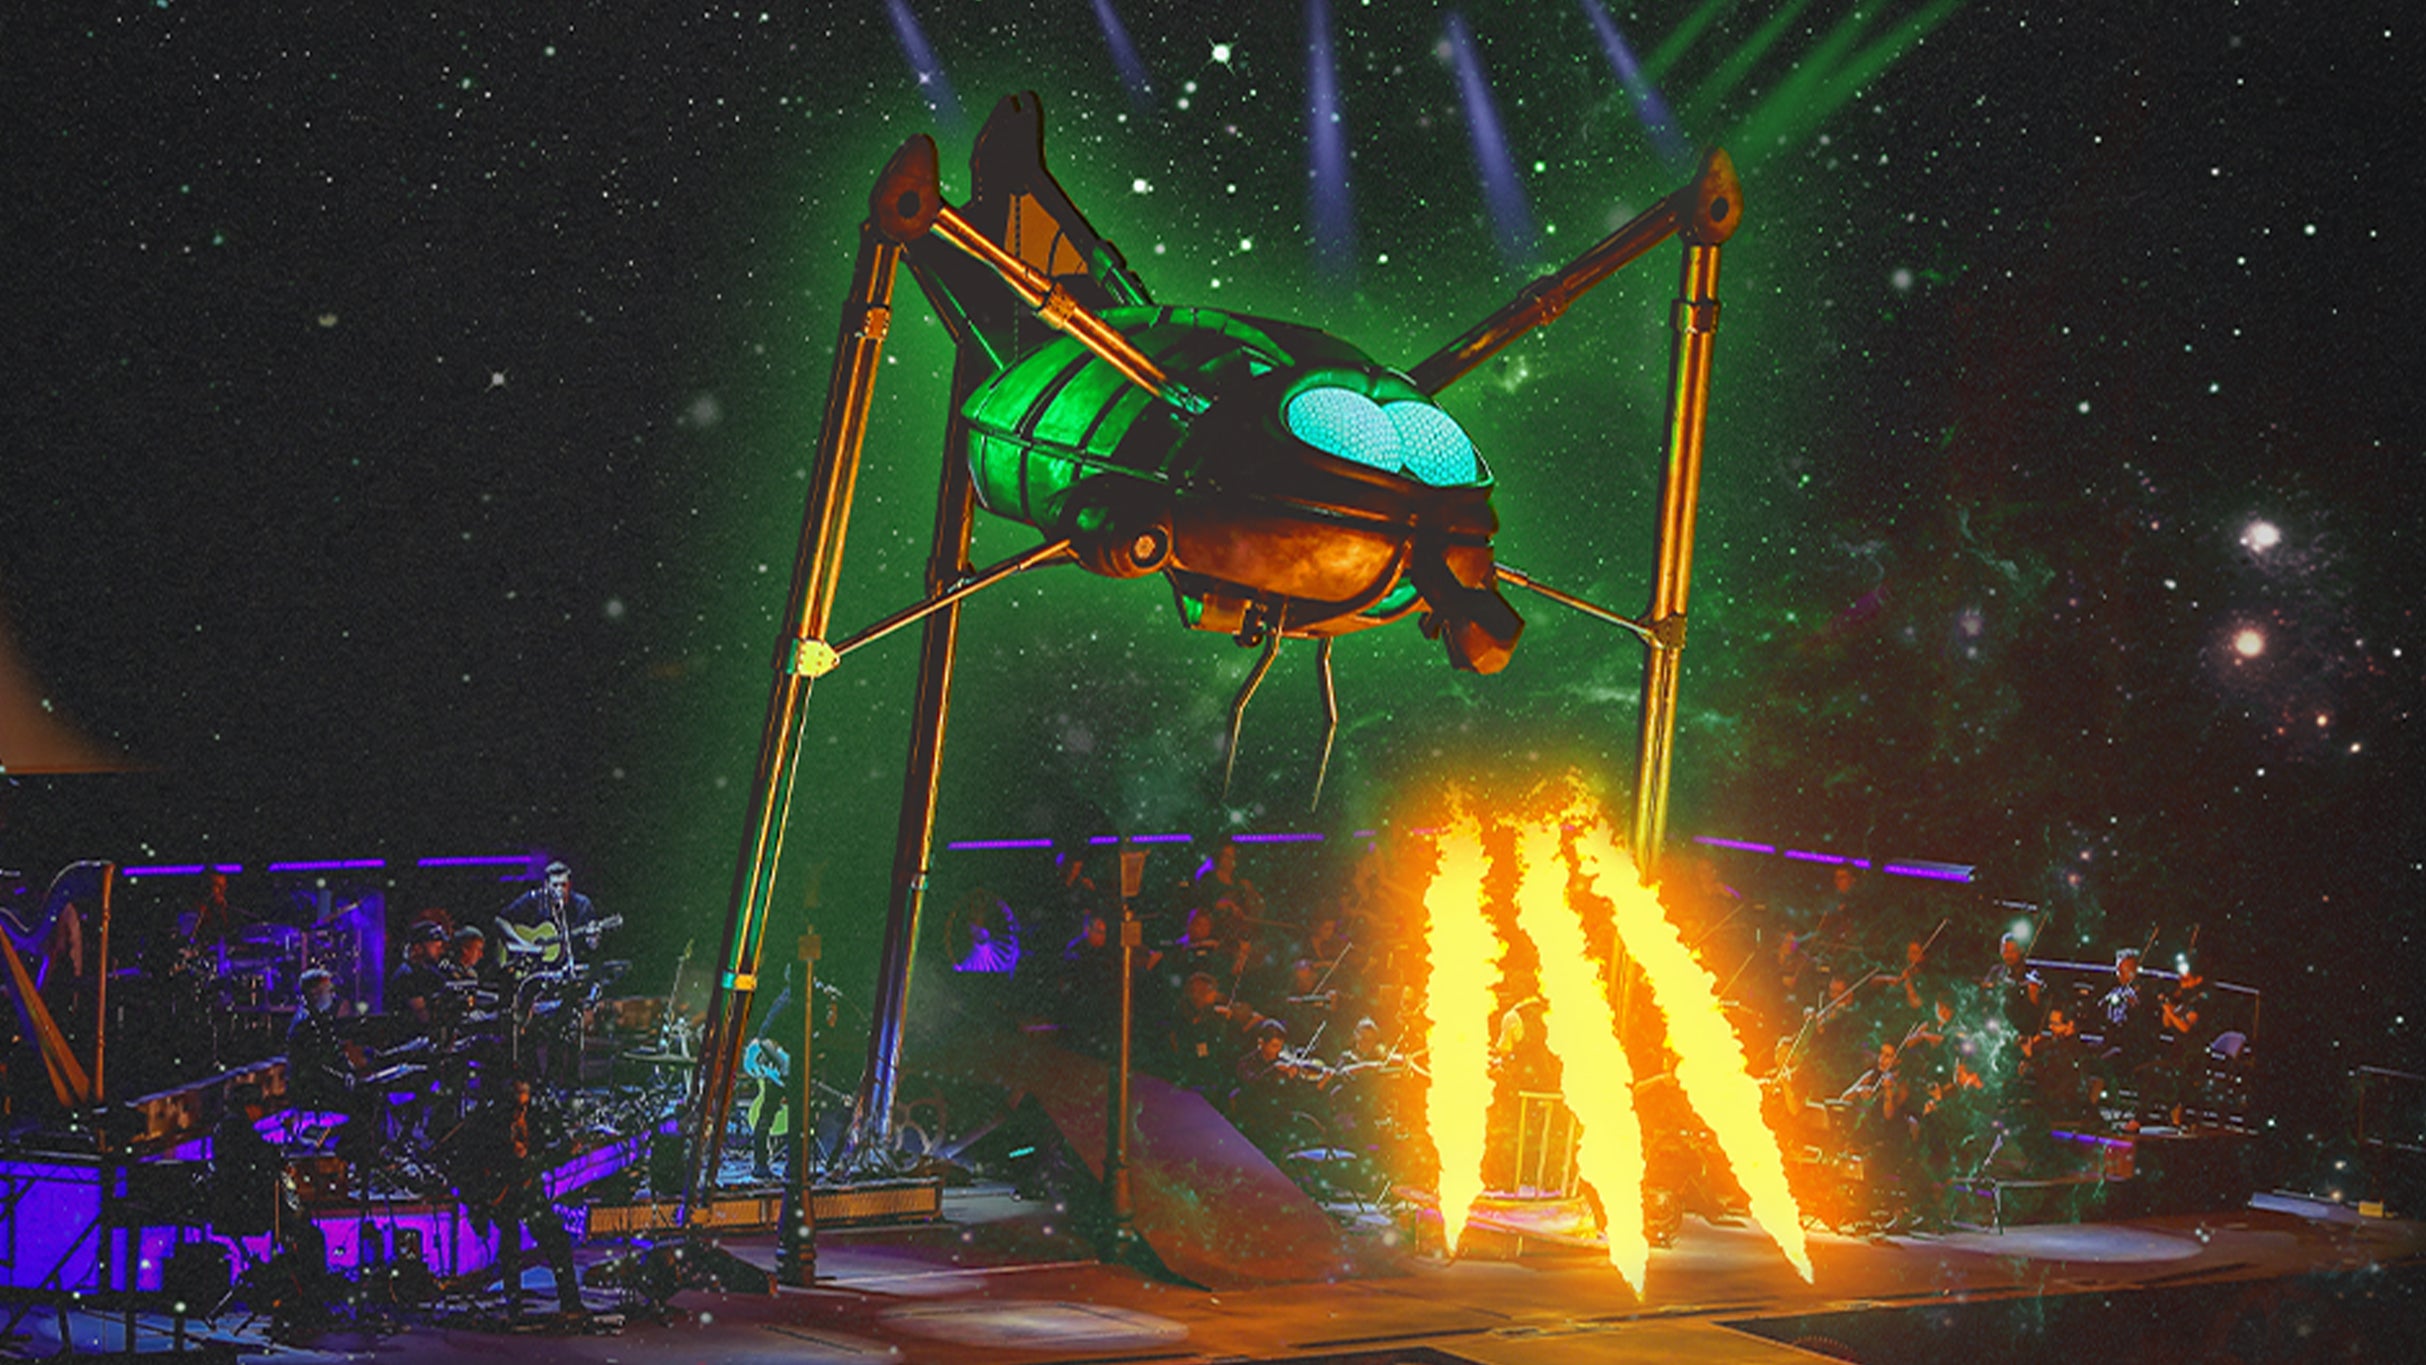 Jeff Wayne's The War Of The Worlds Alive On Stage! The Spirit Of Man in Cardiff promo photo for Venue presale offer code